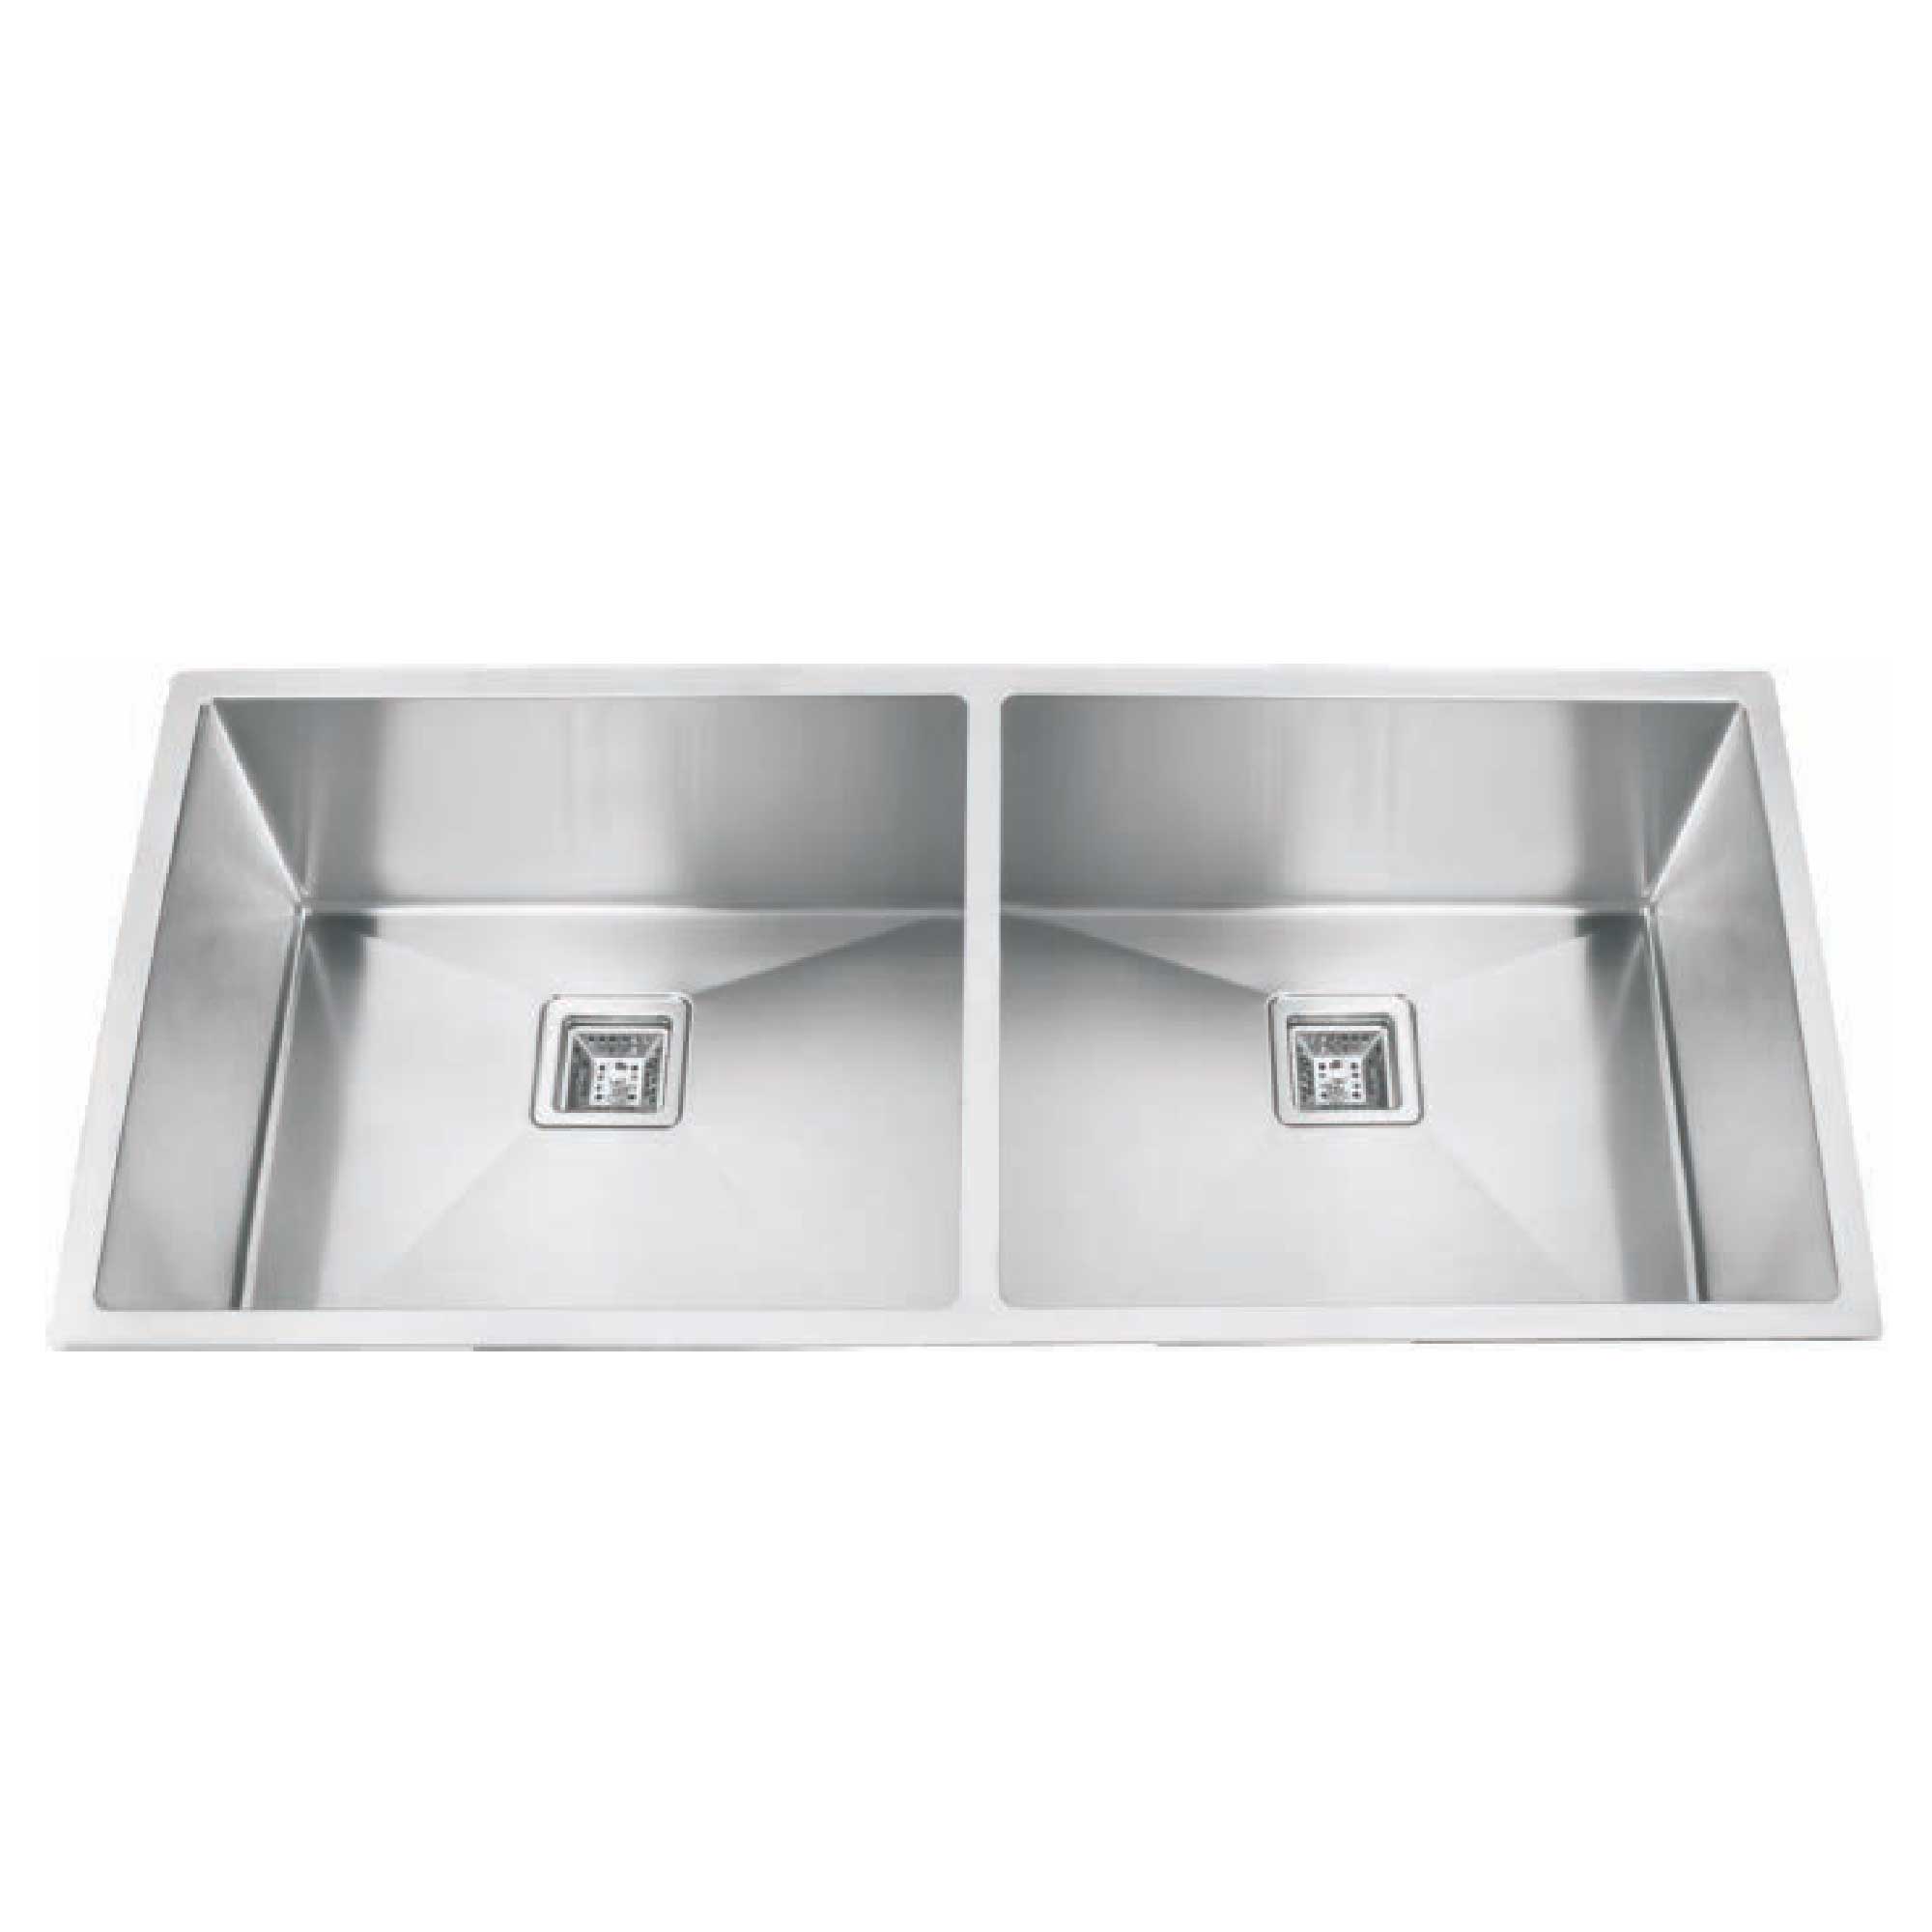 Double Bowl Sink Size:940mm X 450mm X 250 Mm (37"x18"x10")